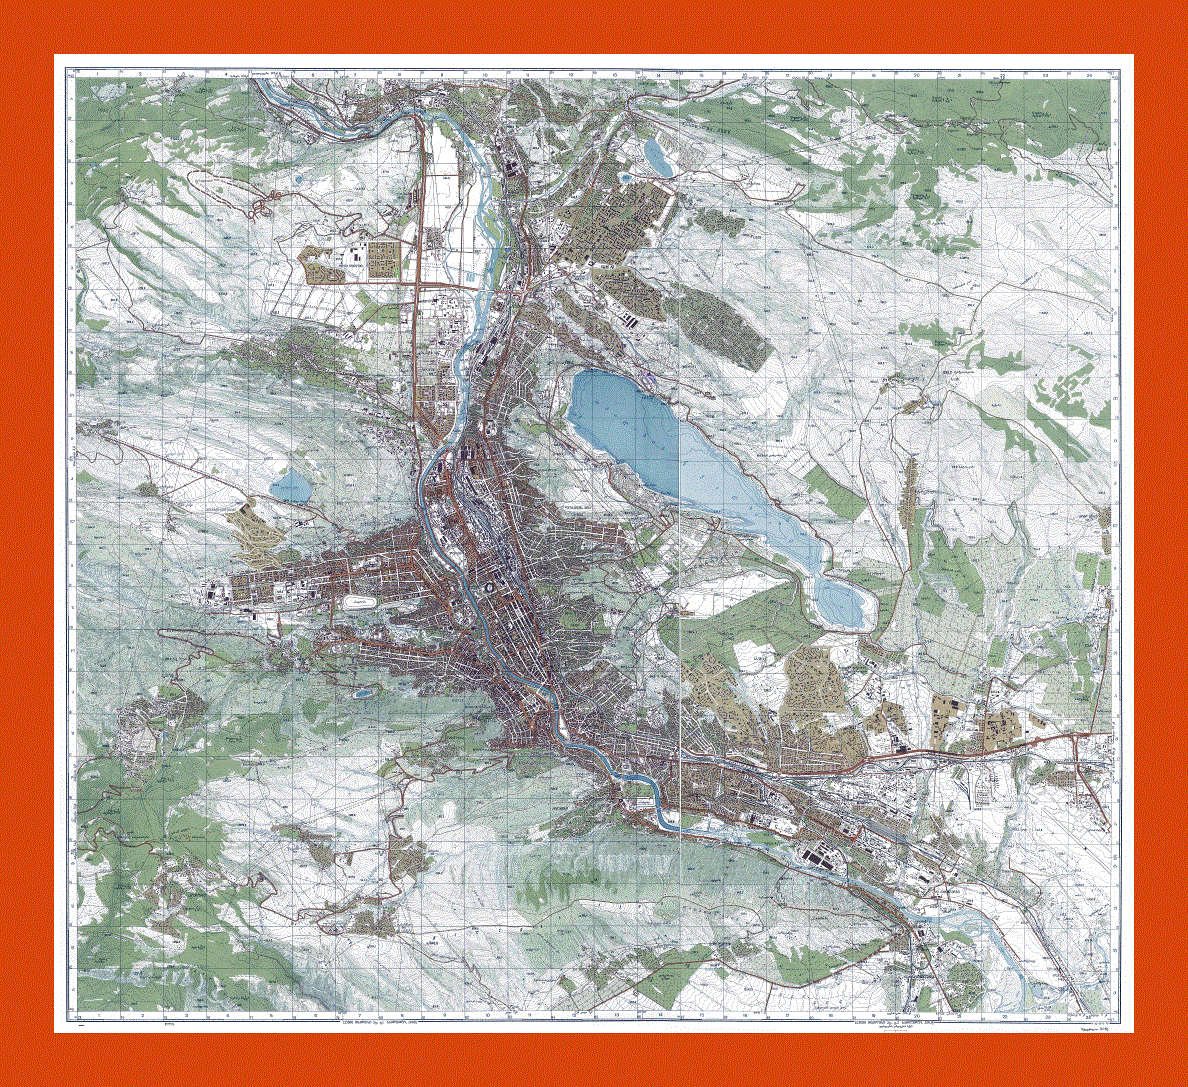 Topographical map of Tbilisi city